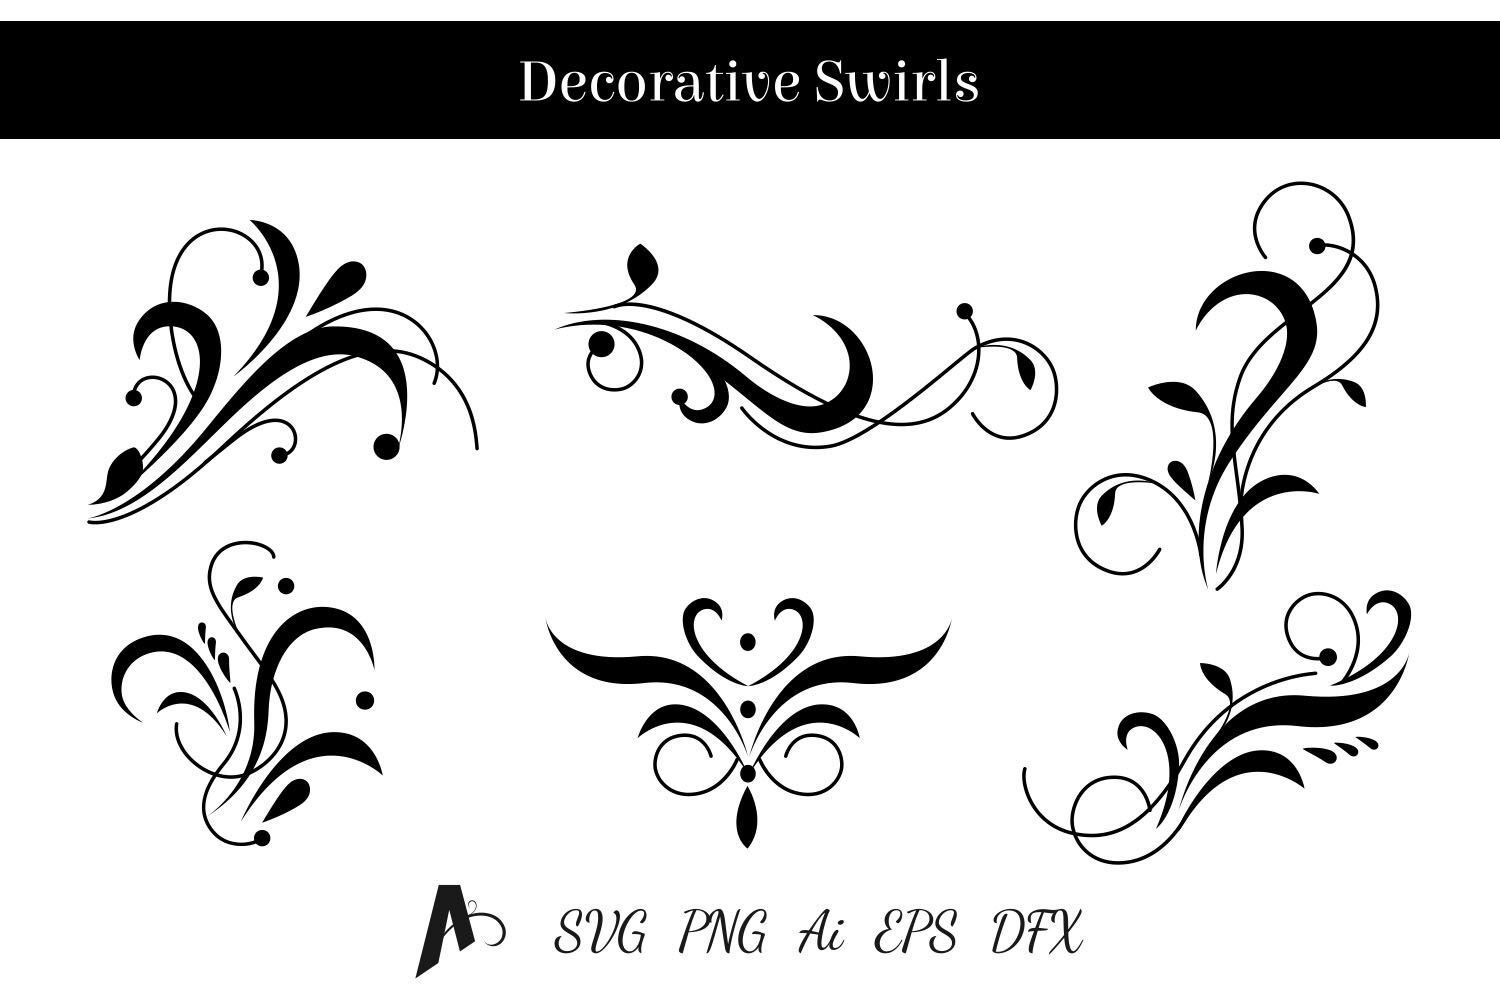 Download Decorative Swirls Design Floral Vector Elements By Aghadhia Designs Thehungryjpeg Com